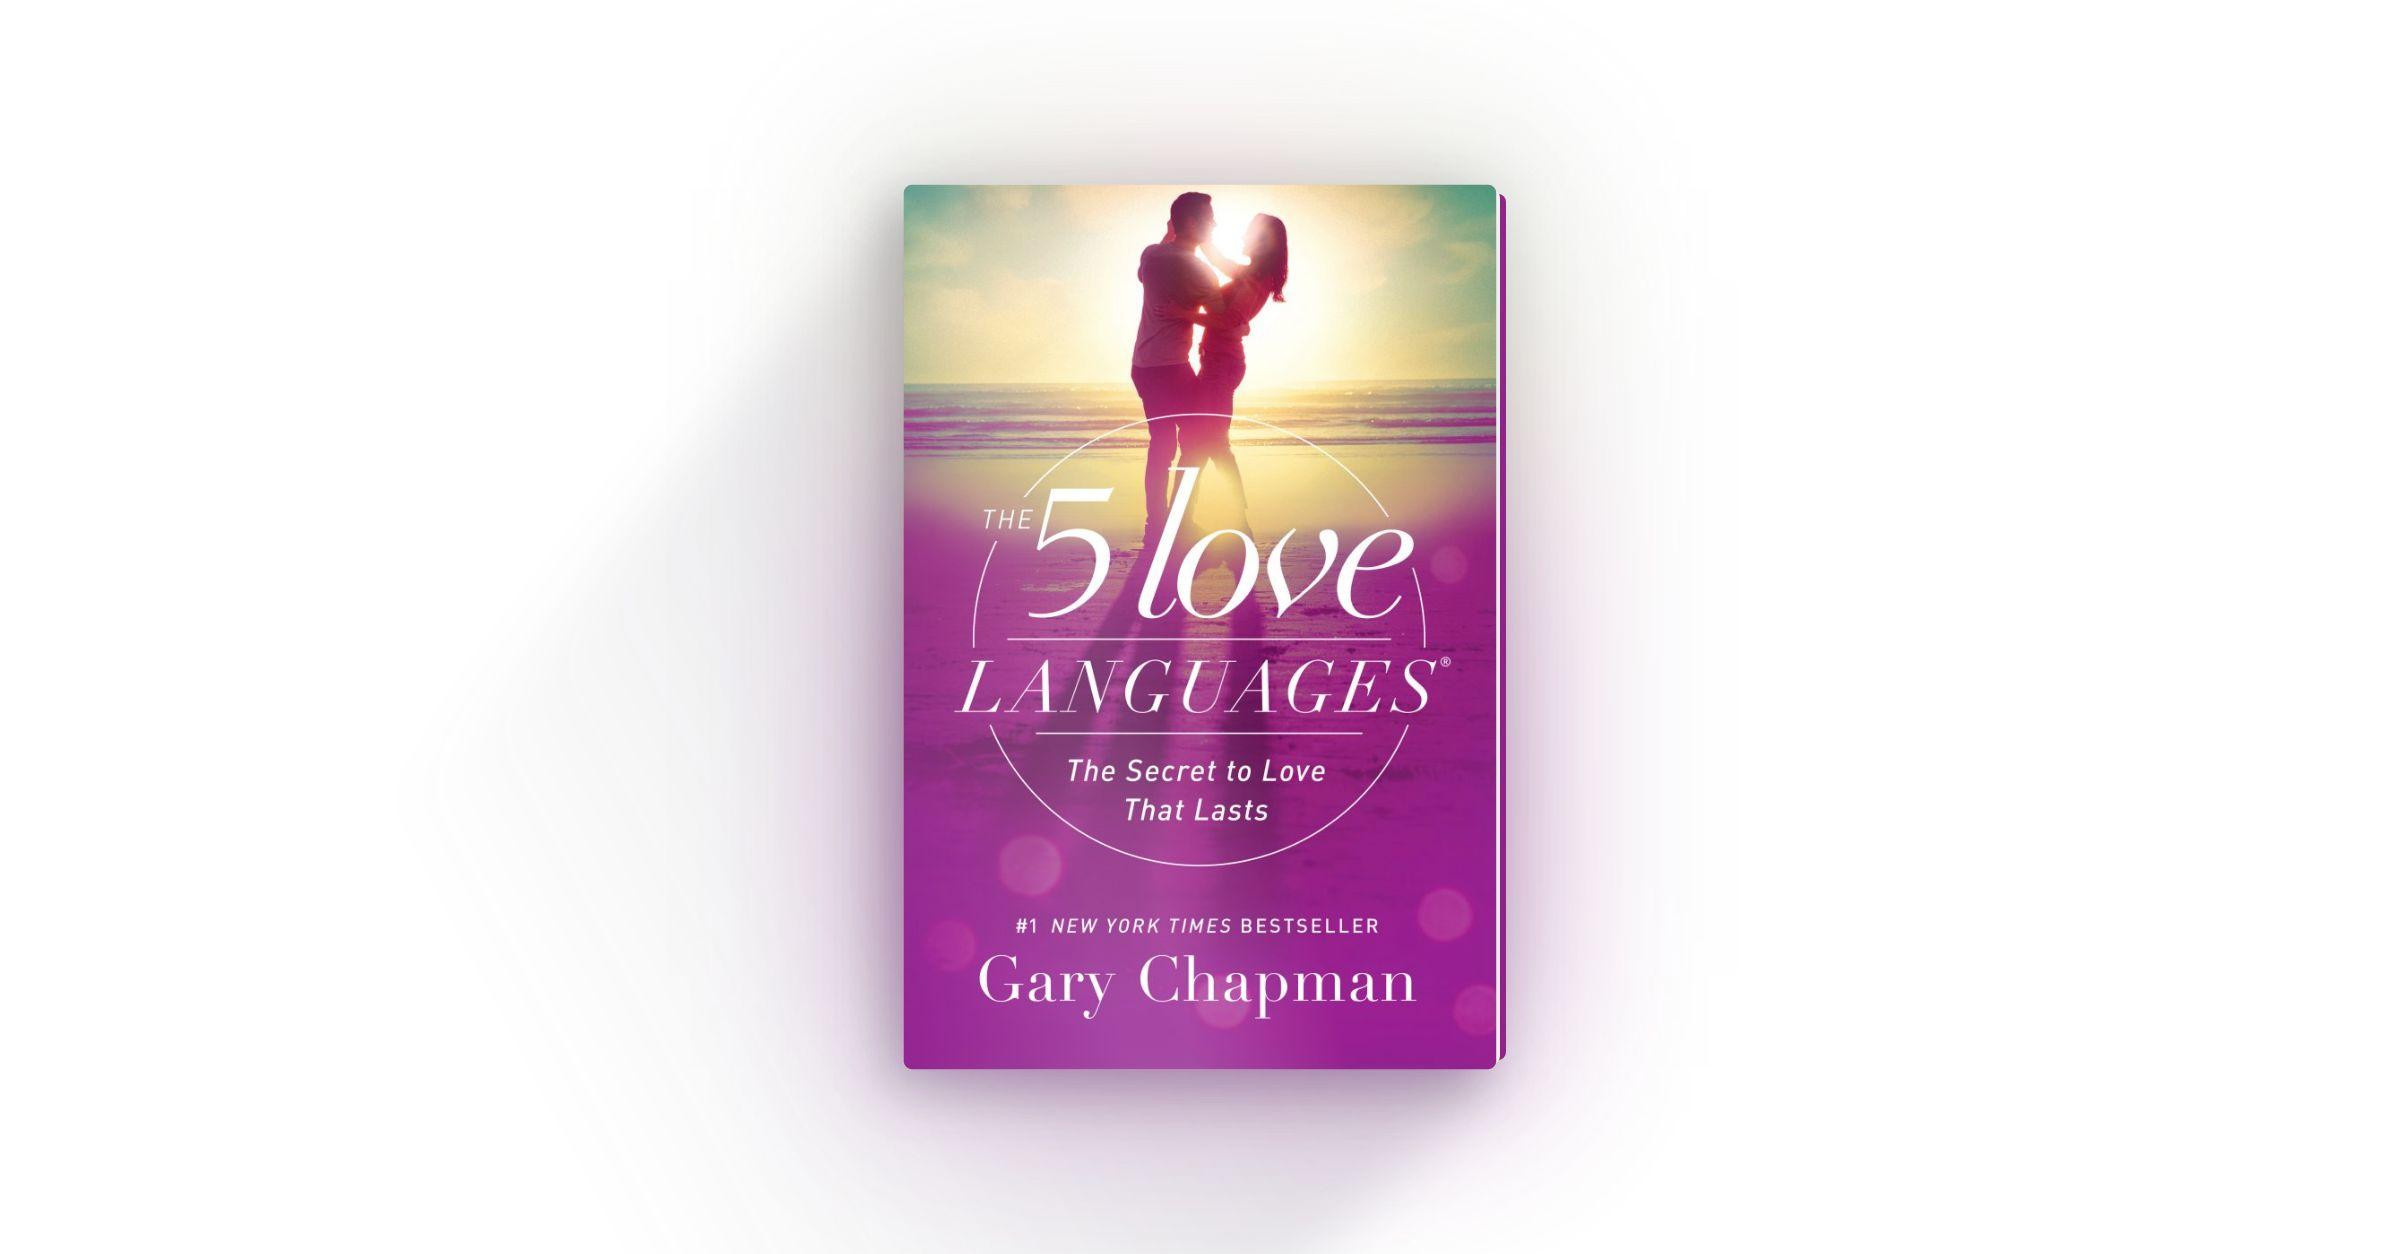 The 5 Love languages: the Secret to Love that lasts" by Gary Chapman -. 5 Languages of Love. 5 Love languages by Gary Chapman. The language of Love игра. Love 5 сайт